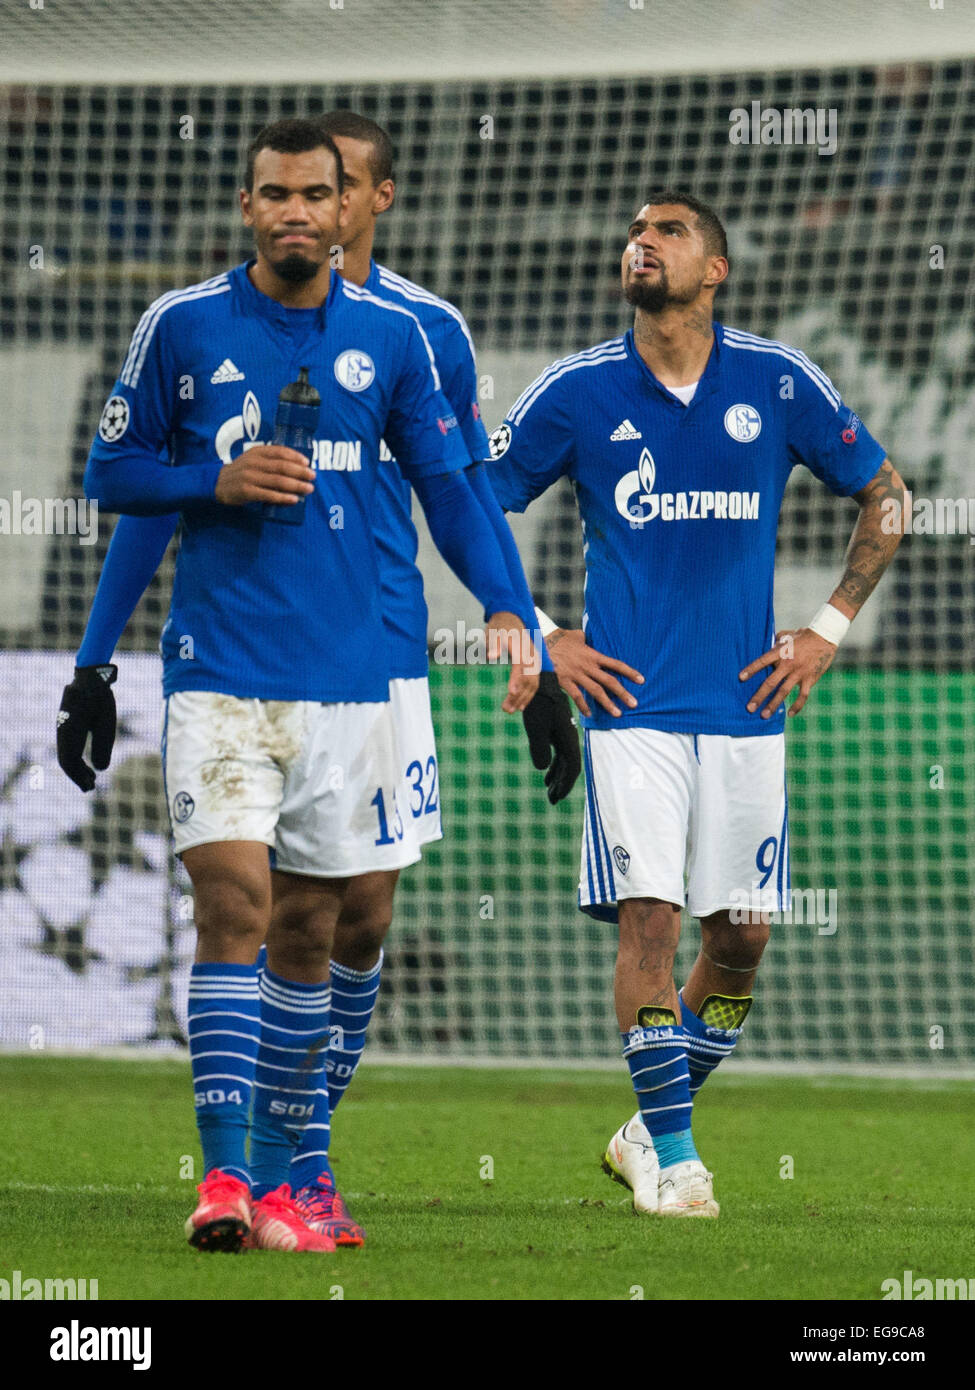 Schalke's Eric Maxim Choupo-Moting (l-r), Joel Matip and Kevin-Prince Boateng walk off the pitch after the Champions League Round of 16 soccer match FC Schalke 04 vs Real Madrid in Gelsenkirchen, 18 February 2015. Photo: Bernd Thissen/dpa Stock Photo